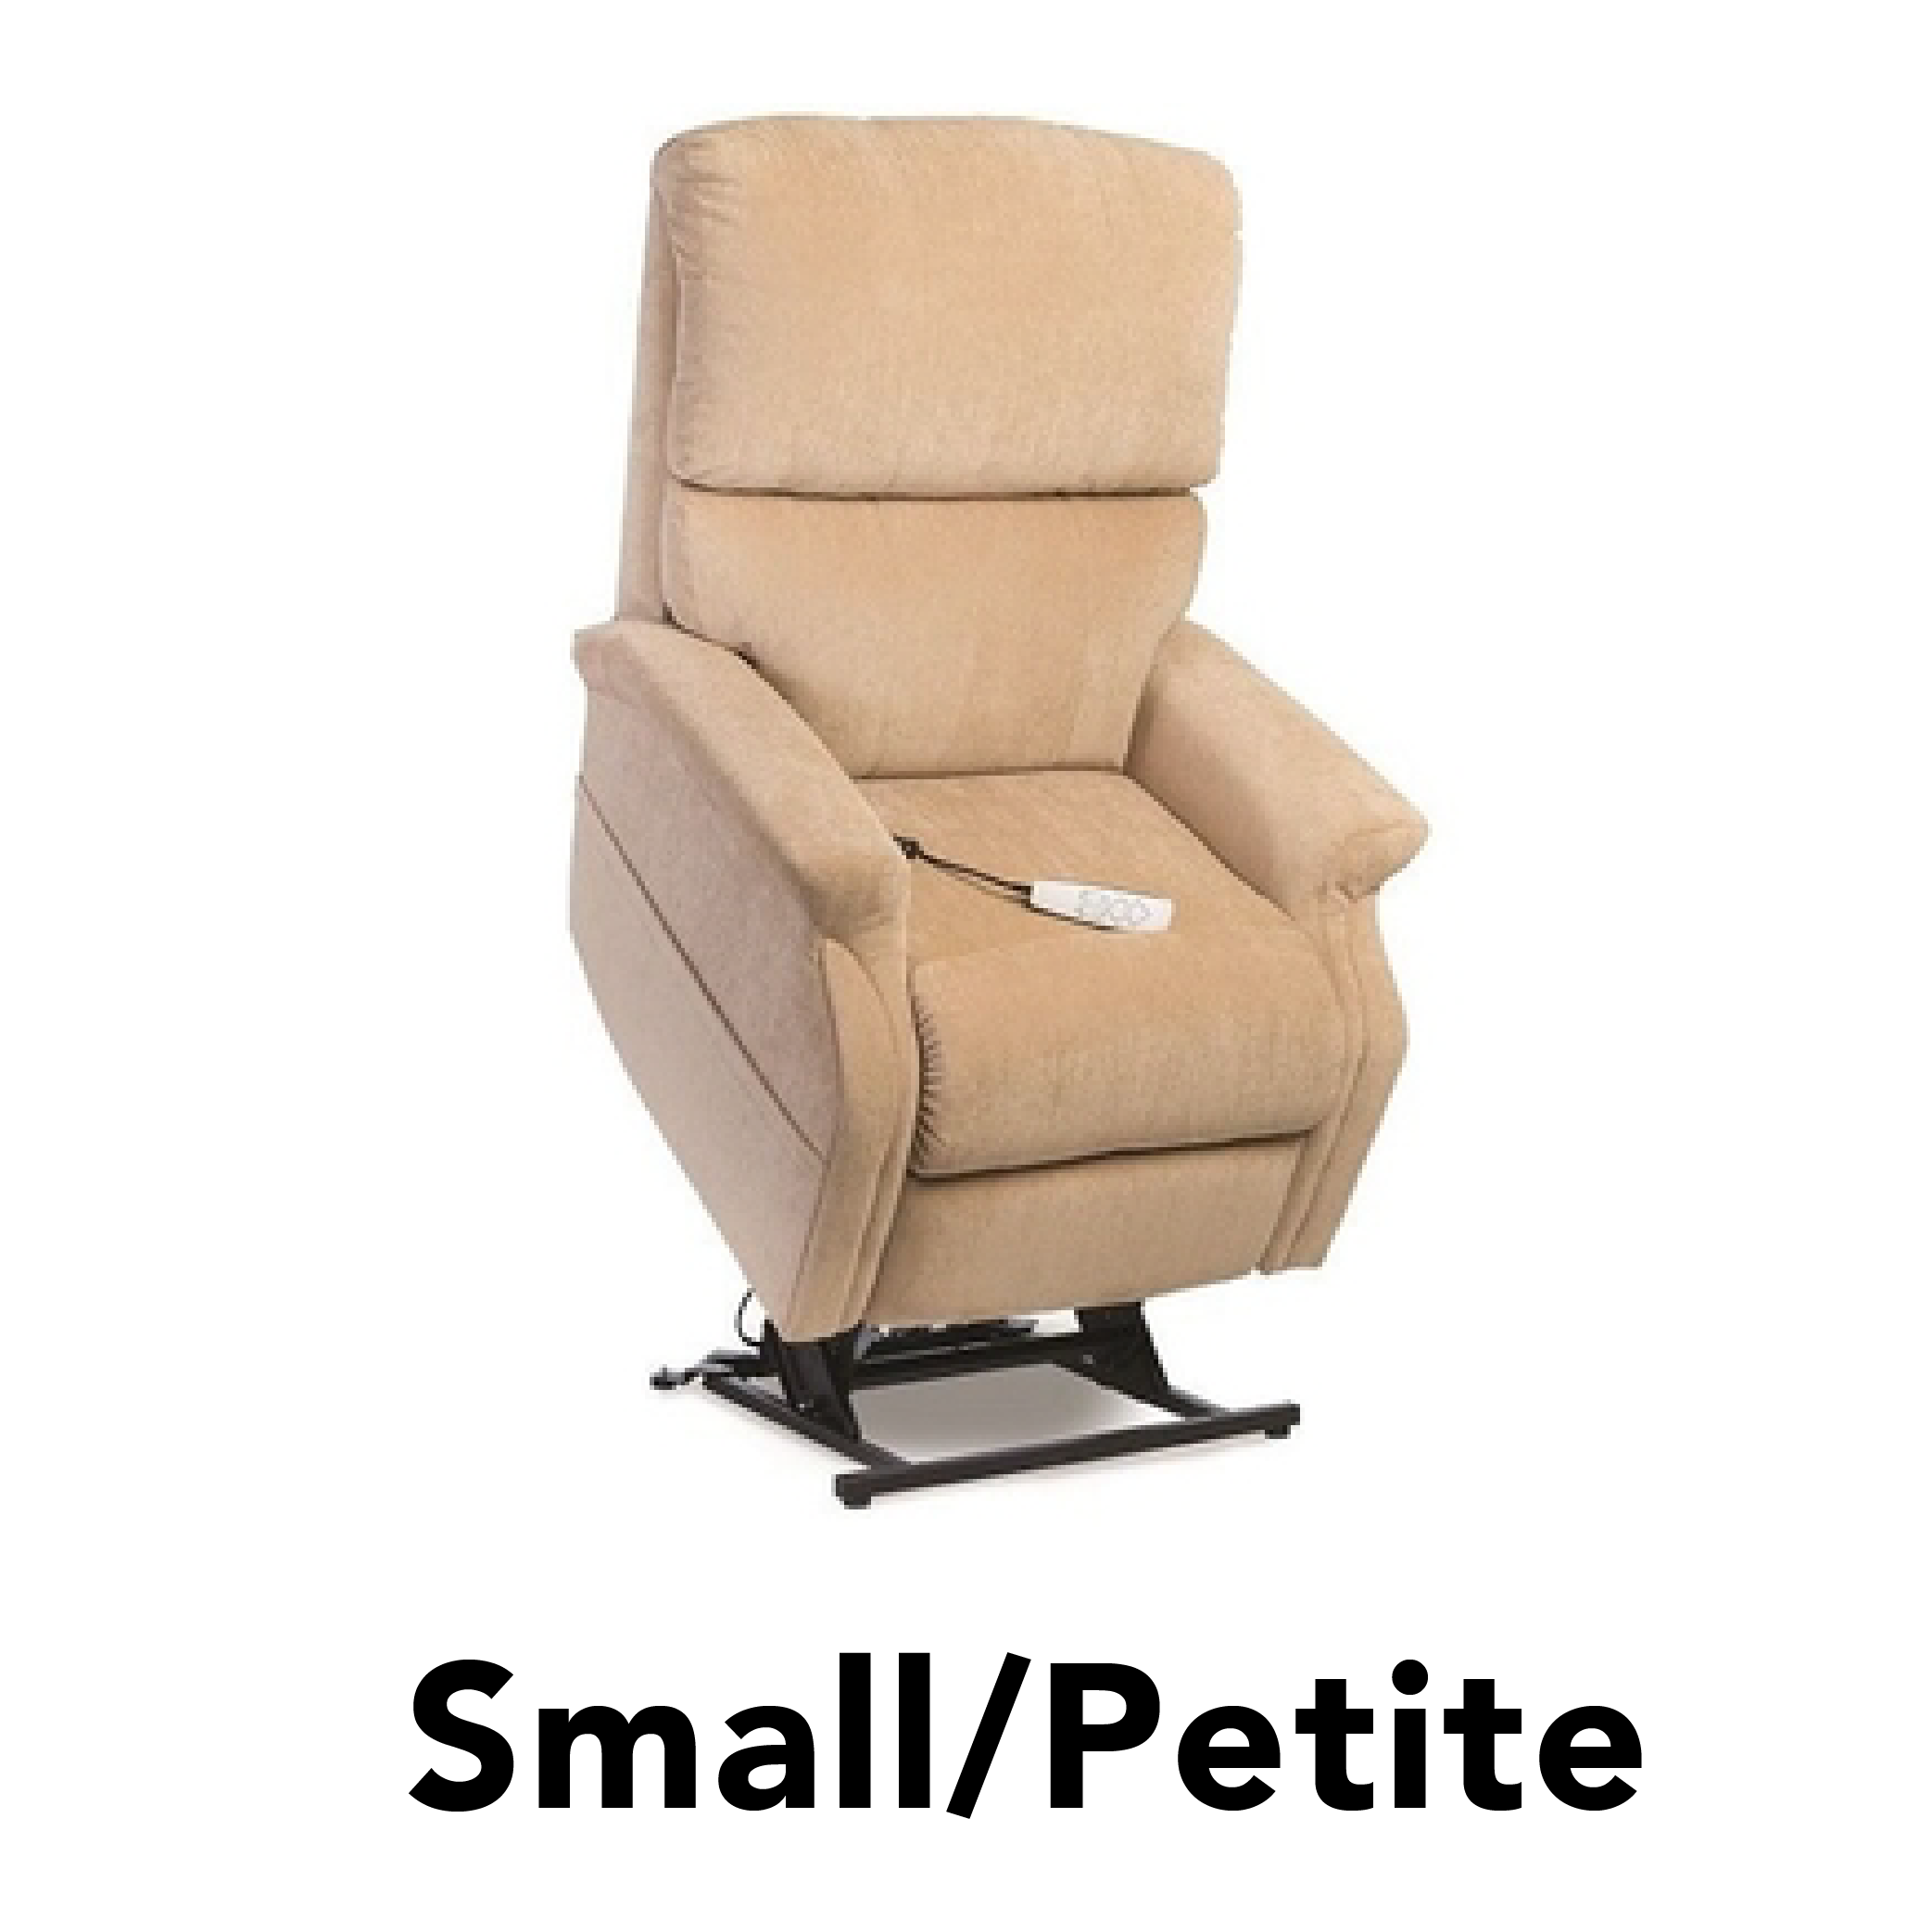 small/petite lift chairs category